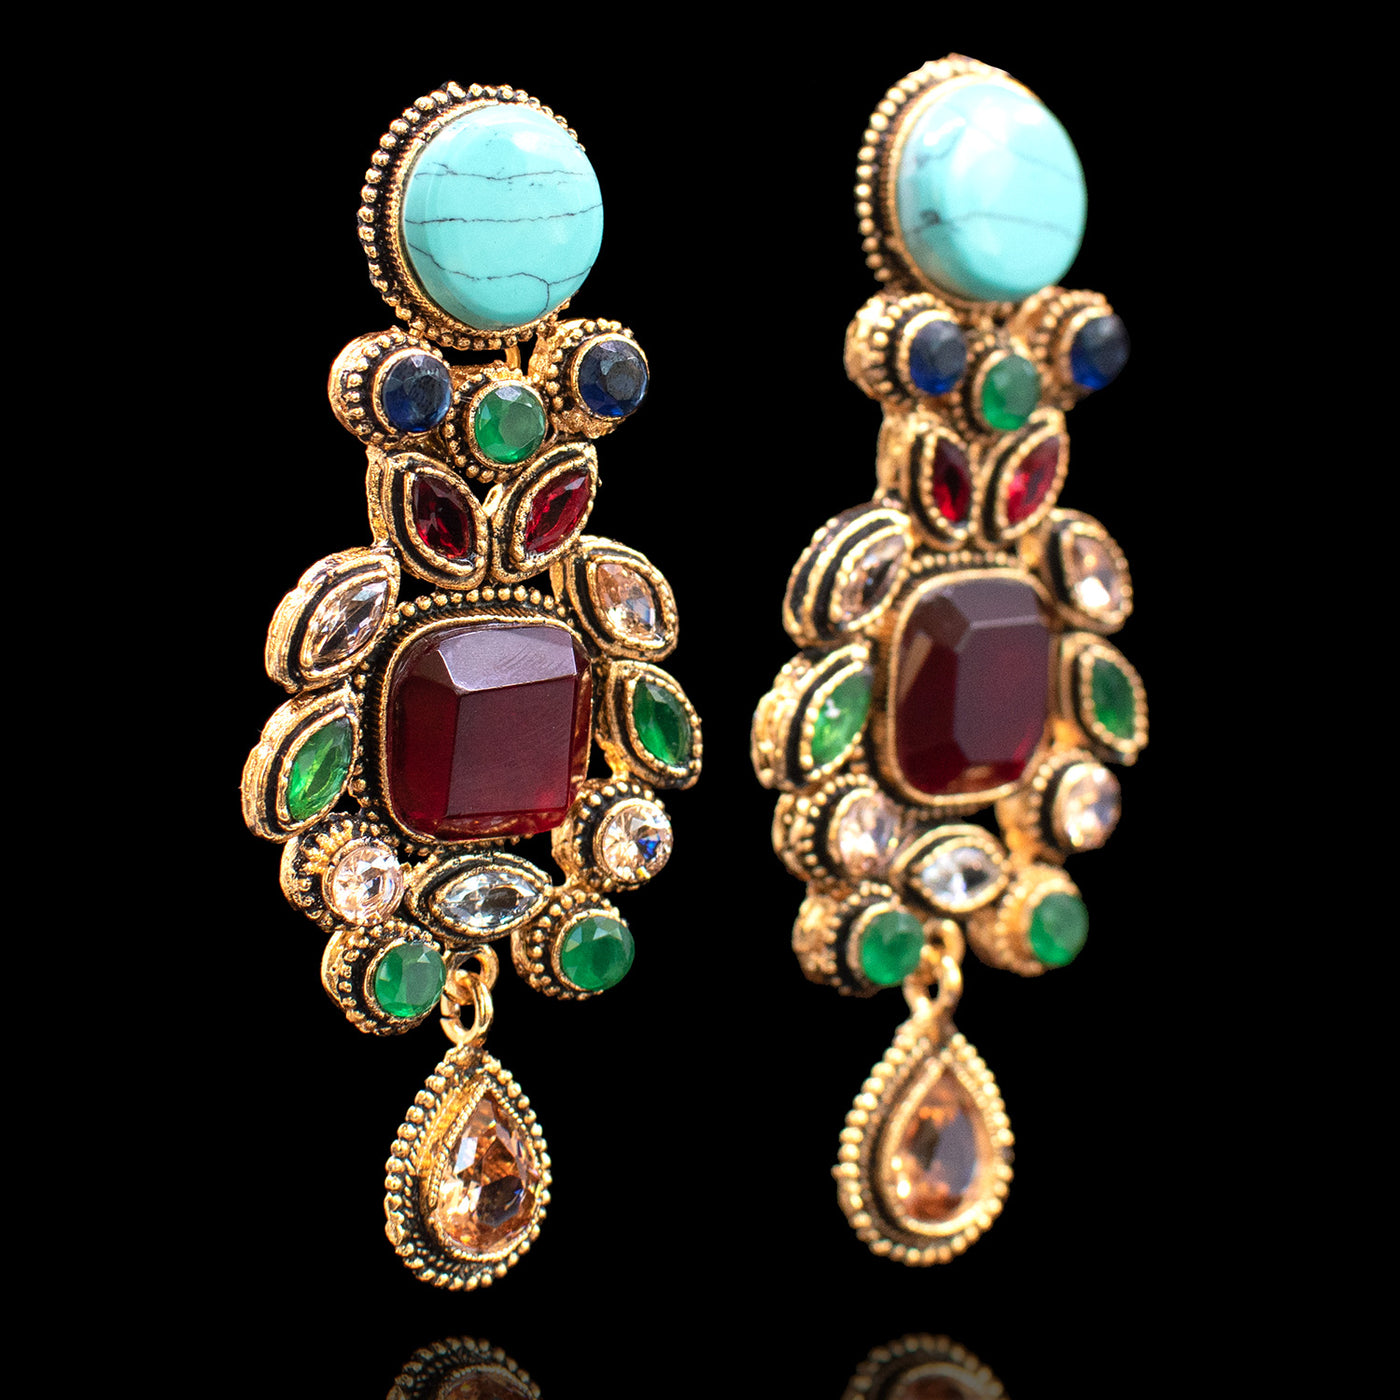 Shaista Earrings - Available in 2 Colors